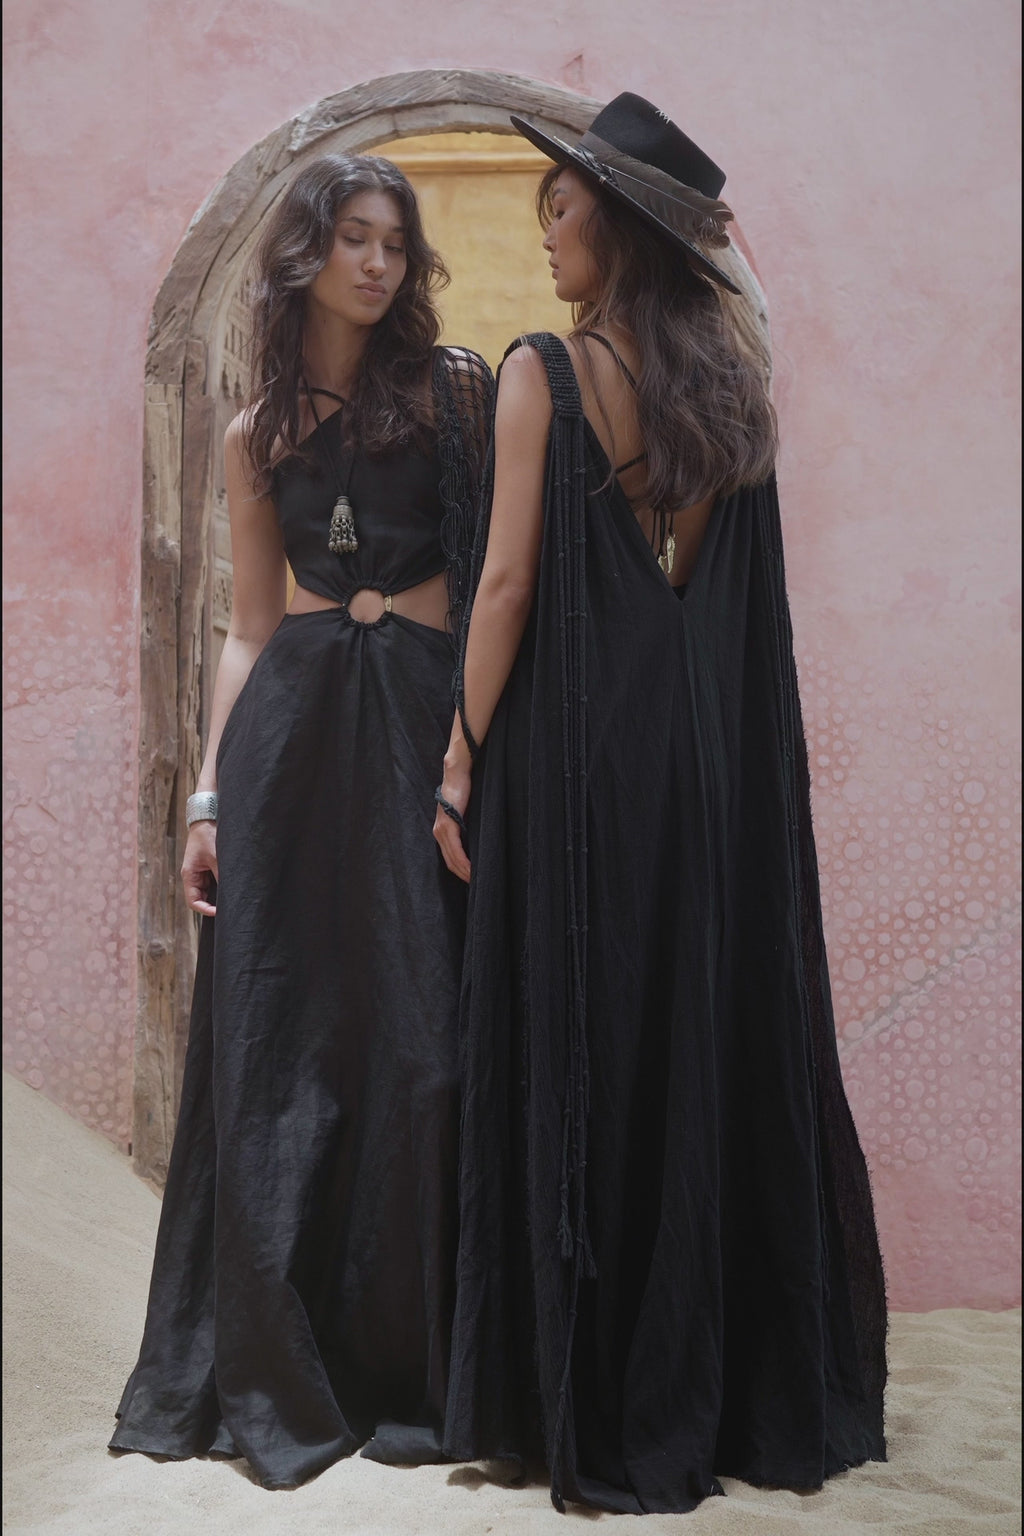 Shop the captivating Black Greek Goddess Cape Dress by Aya Sacred Wear. Stand out with this unique, fashionable and bold design.